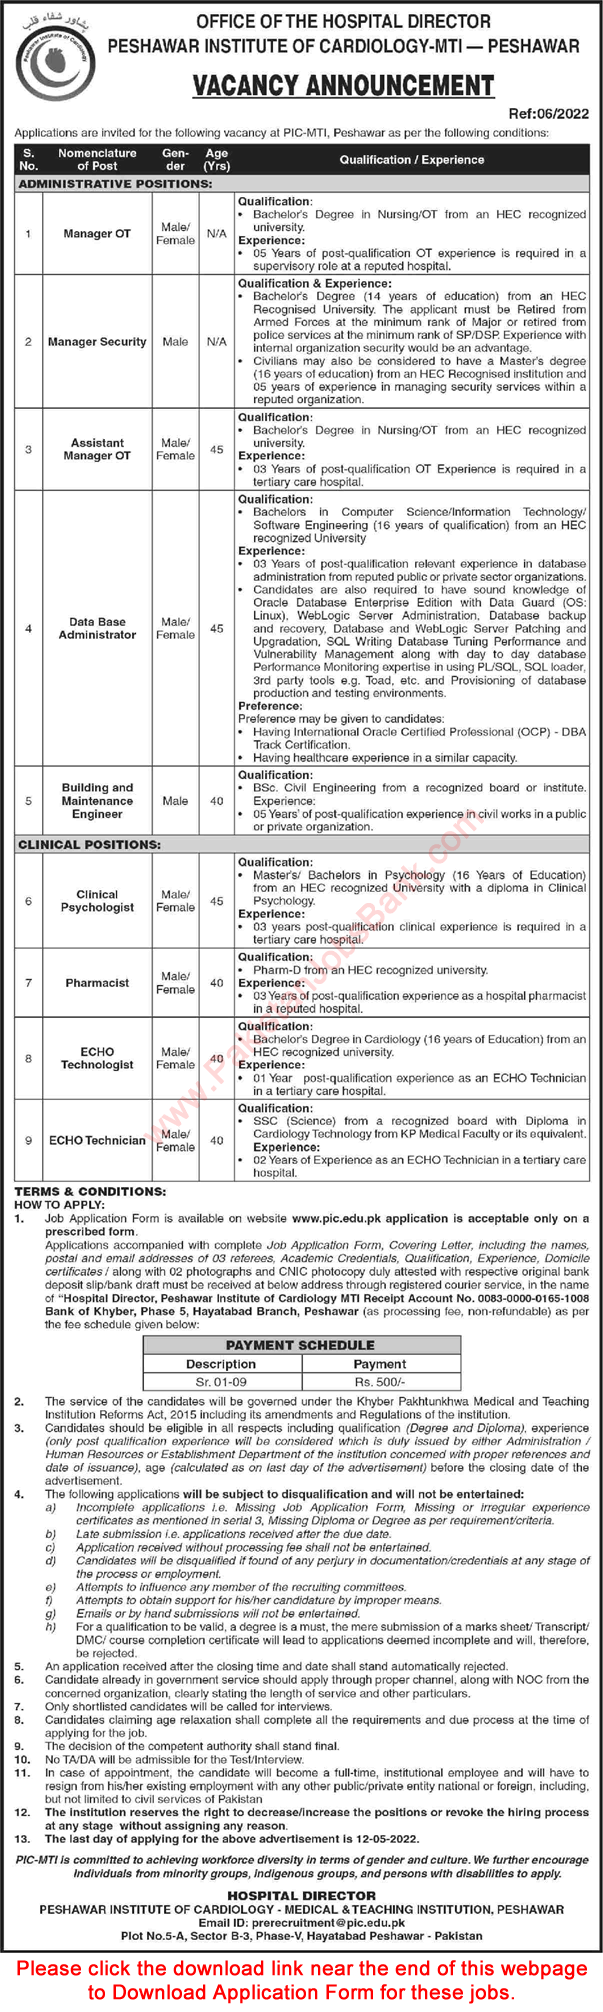 Peshawar Institute of Cardiology Jobs April 2022 PIC Application Form Pharmacist, ECHO Technician & Others Latest